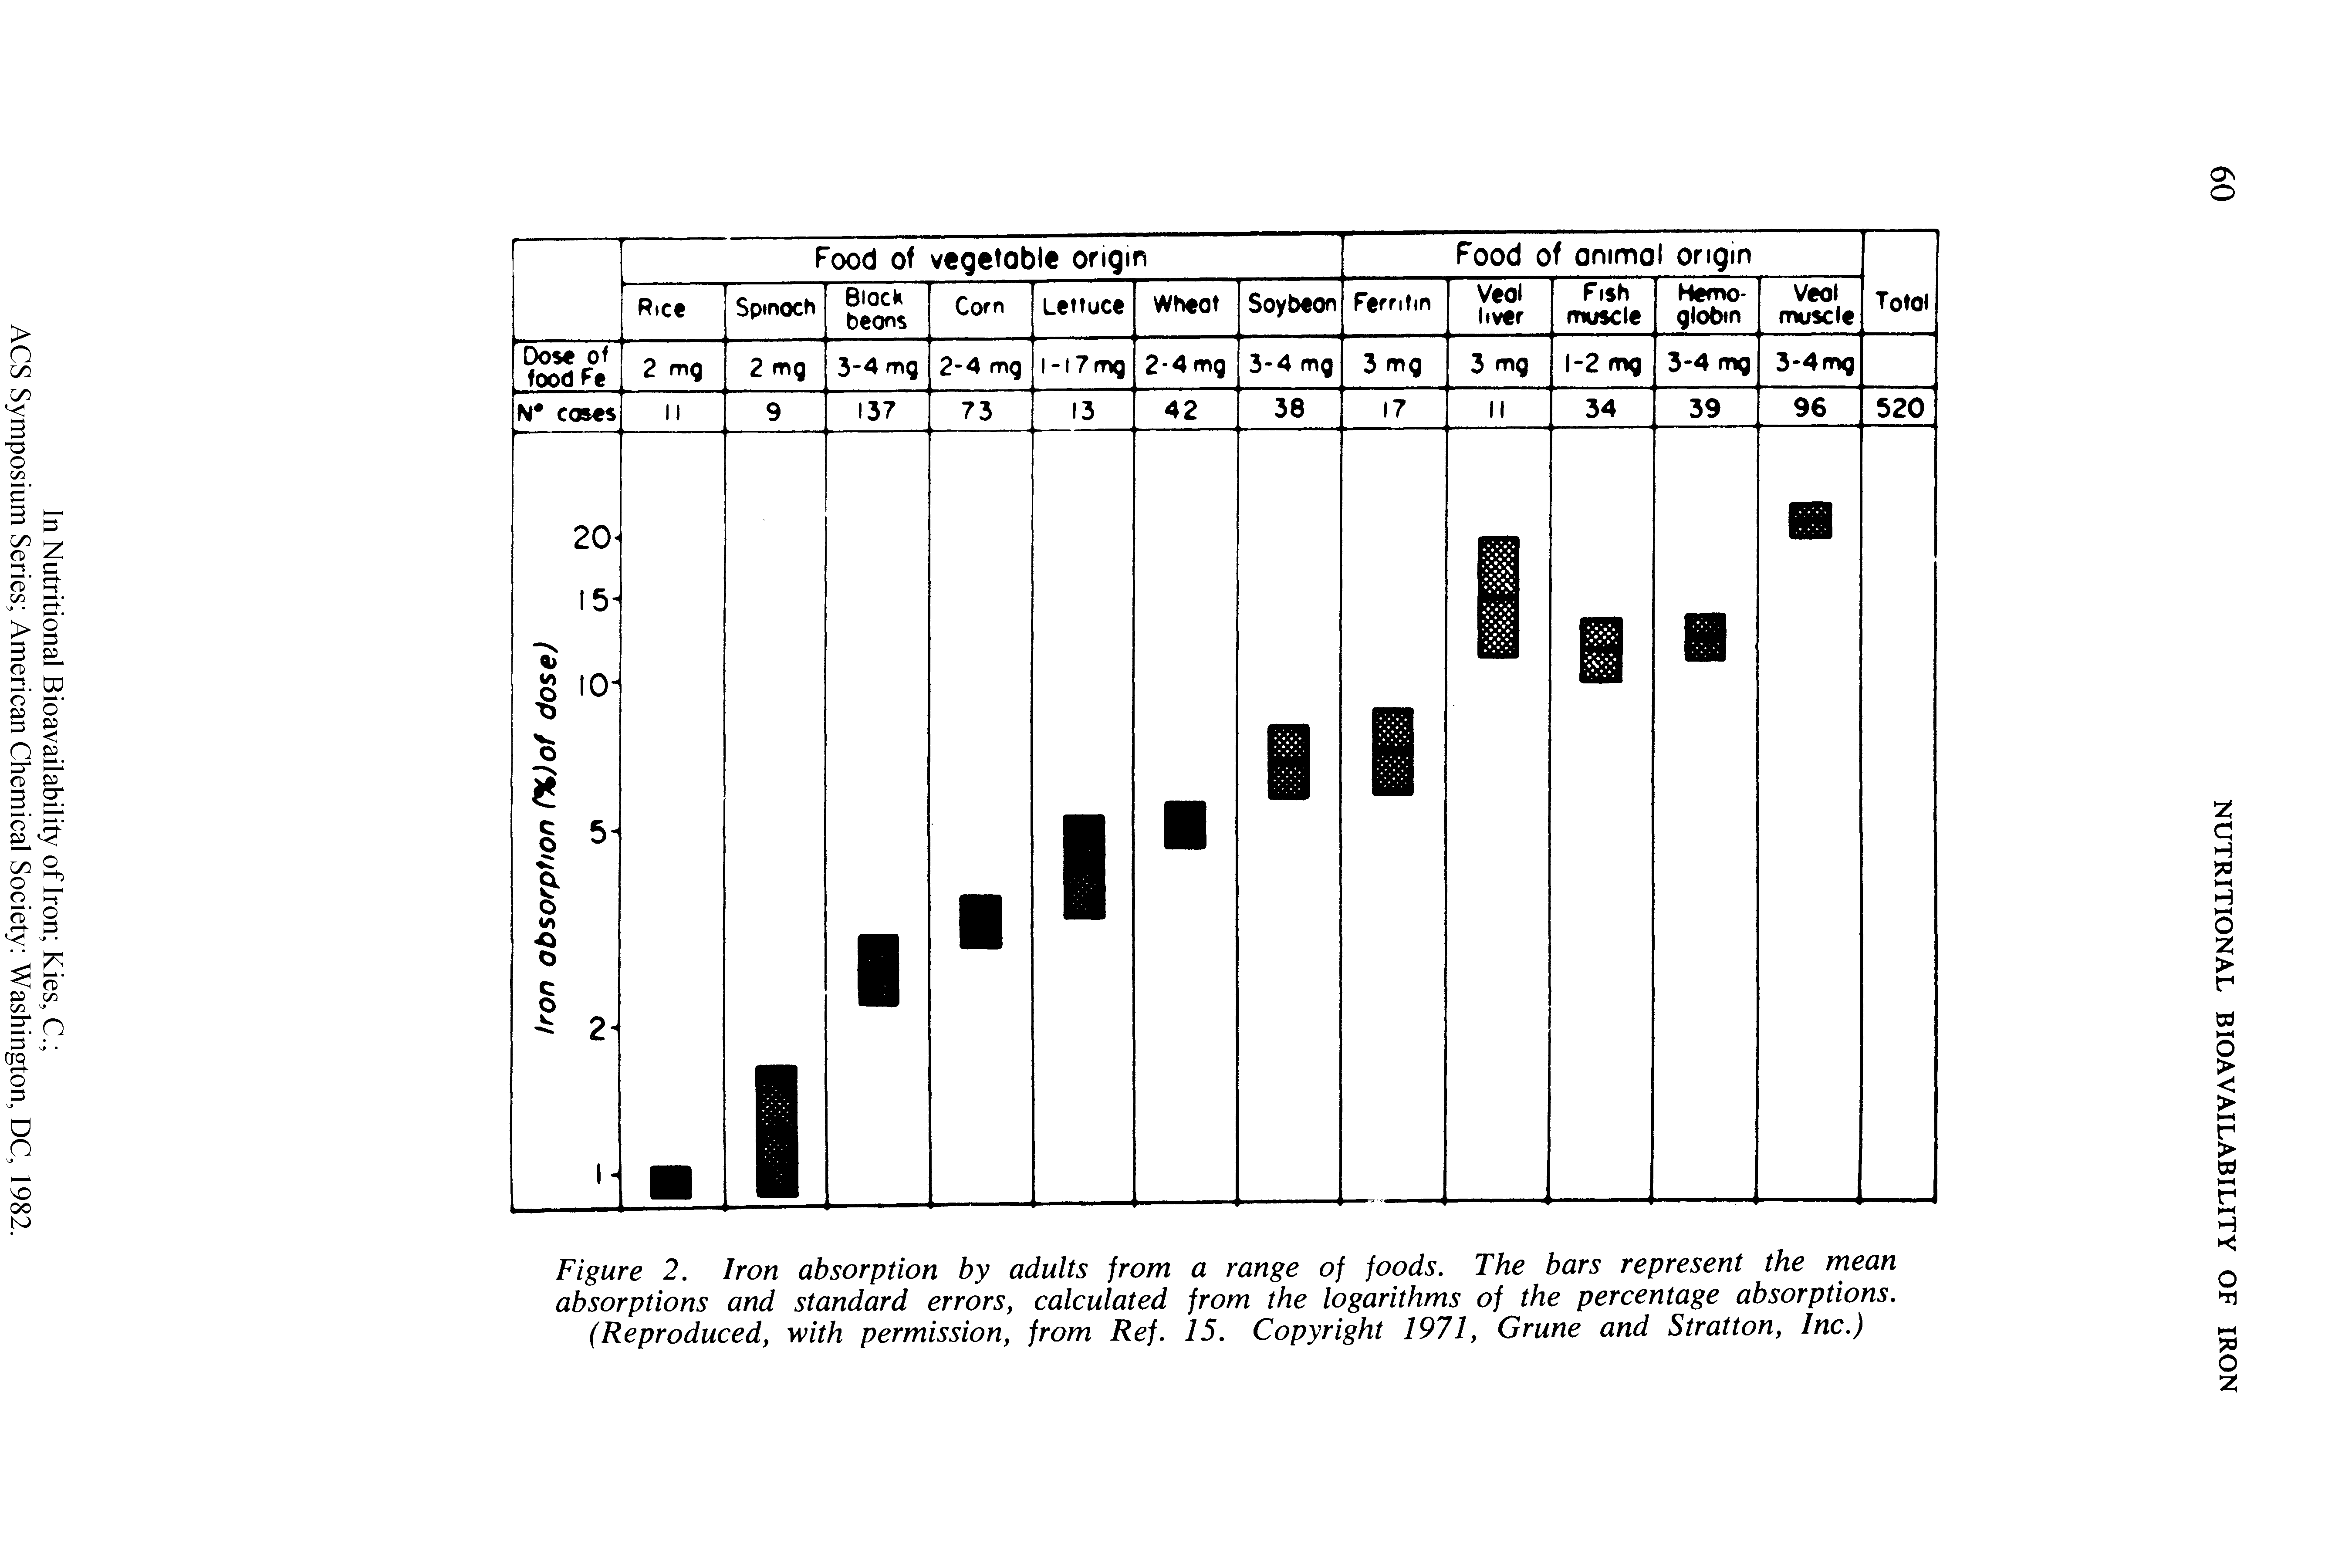 Figure 2. Iron absorption by adults from a range of foods. The bars represent the mean absorptions and standard errors, calculated from the logarithms of the percentage absorptions. (Reproduced, with permission, from Ref. 15. Copyright 1971, Grune and Stratton, Inc.)...